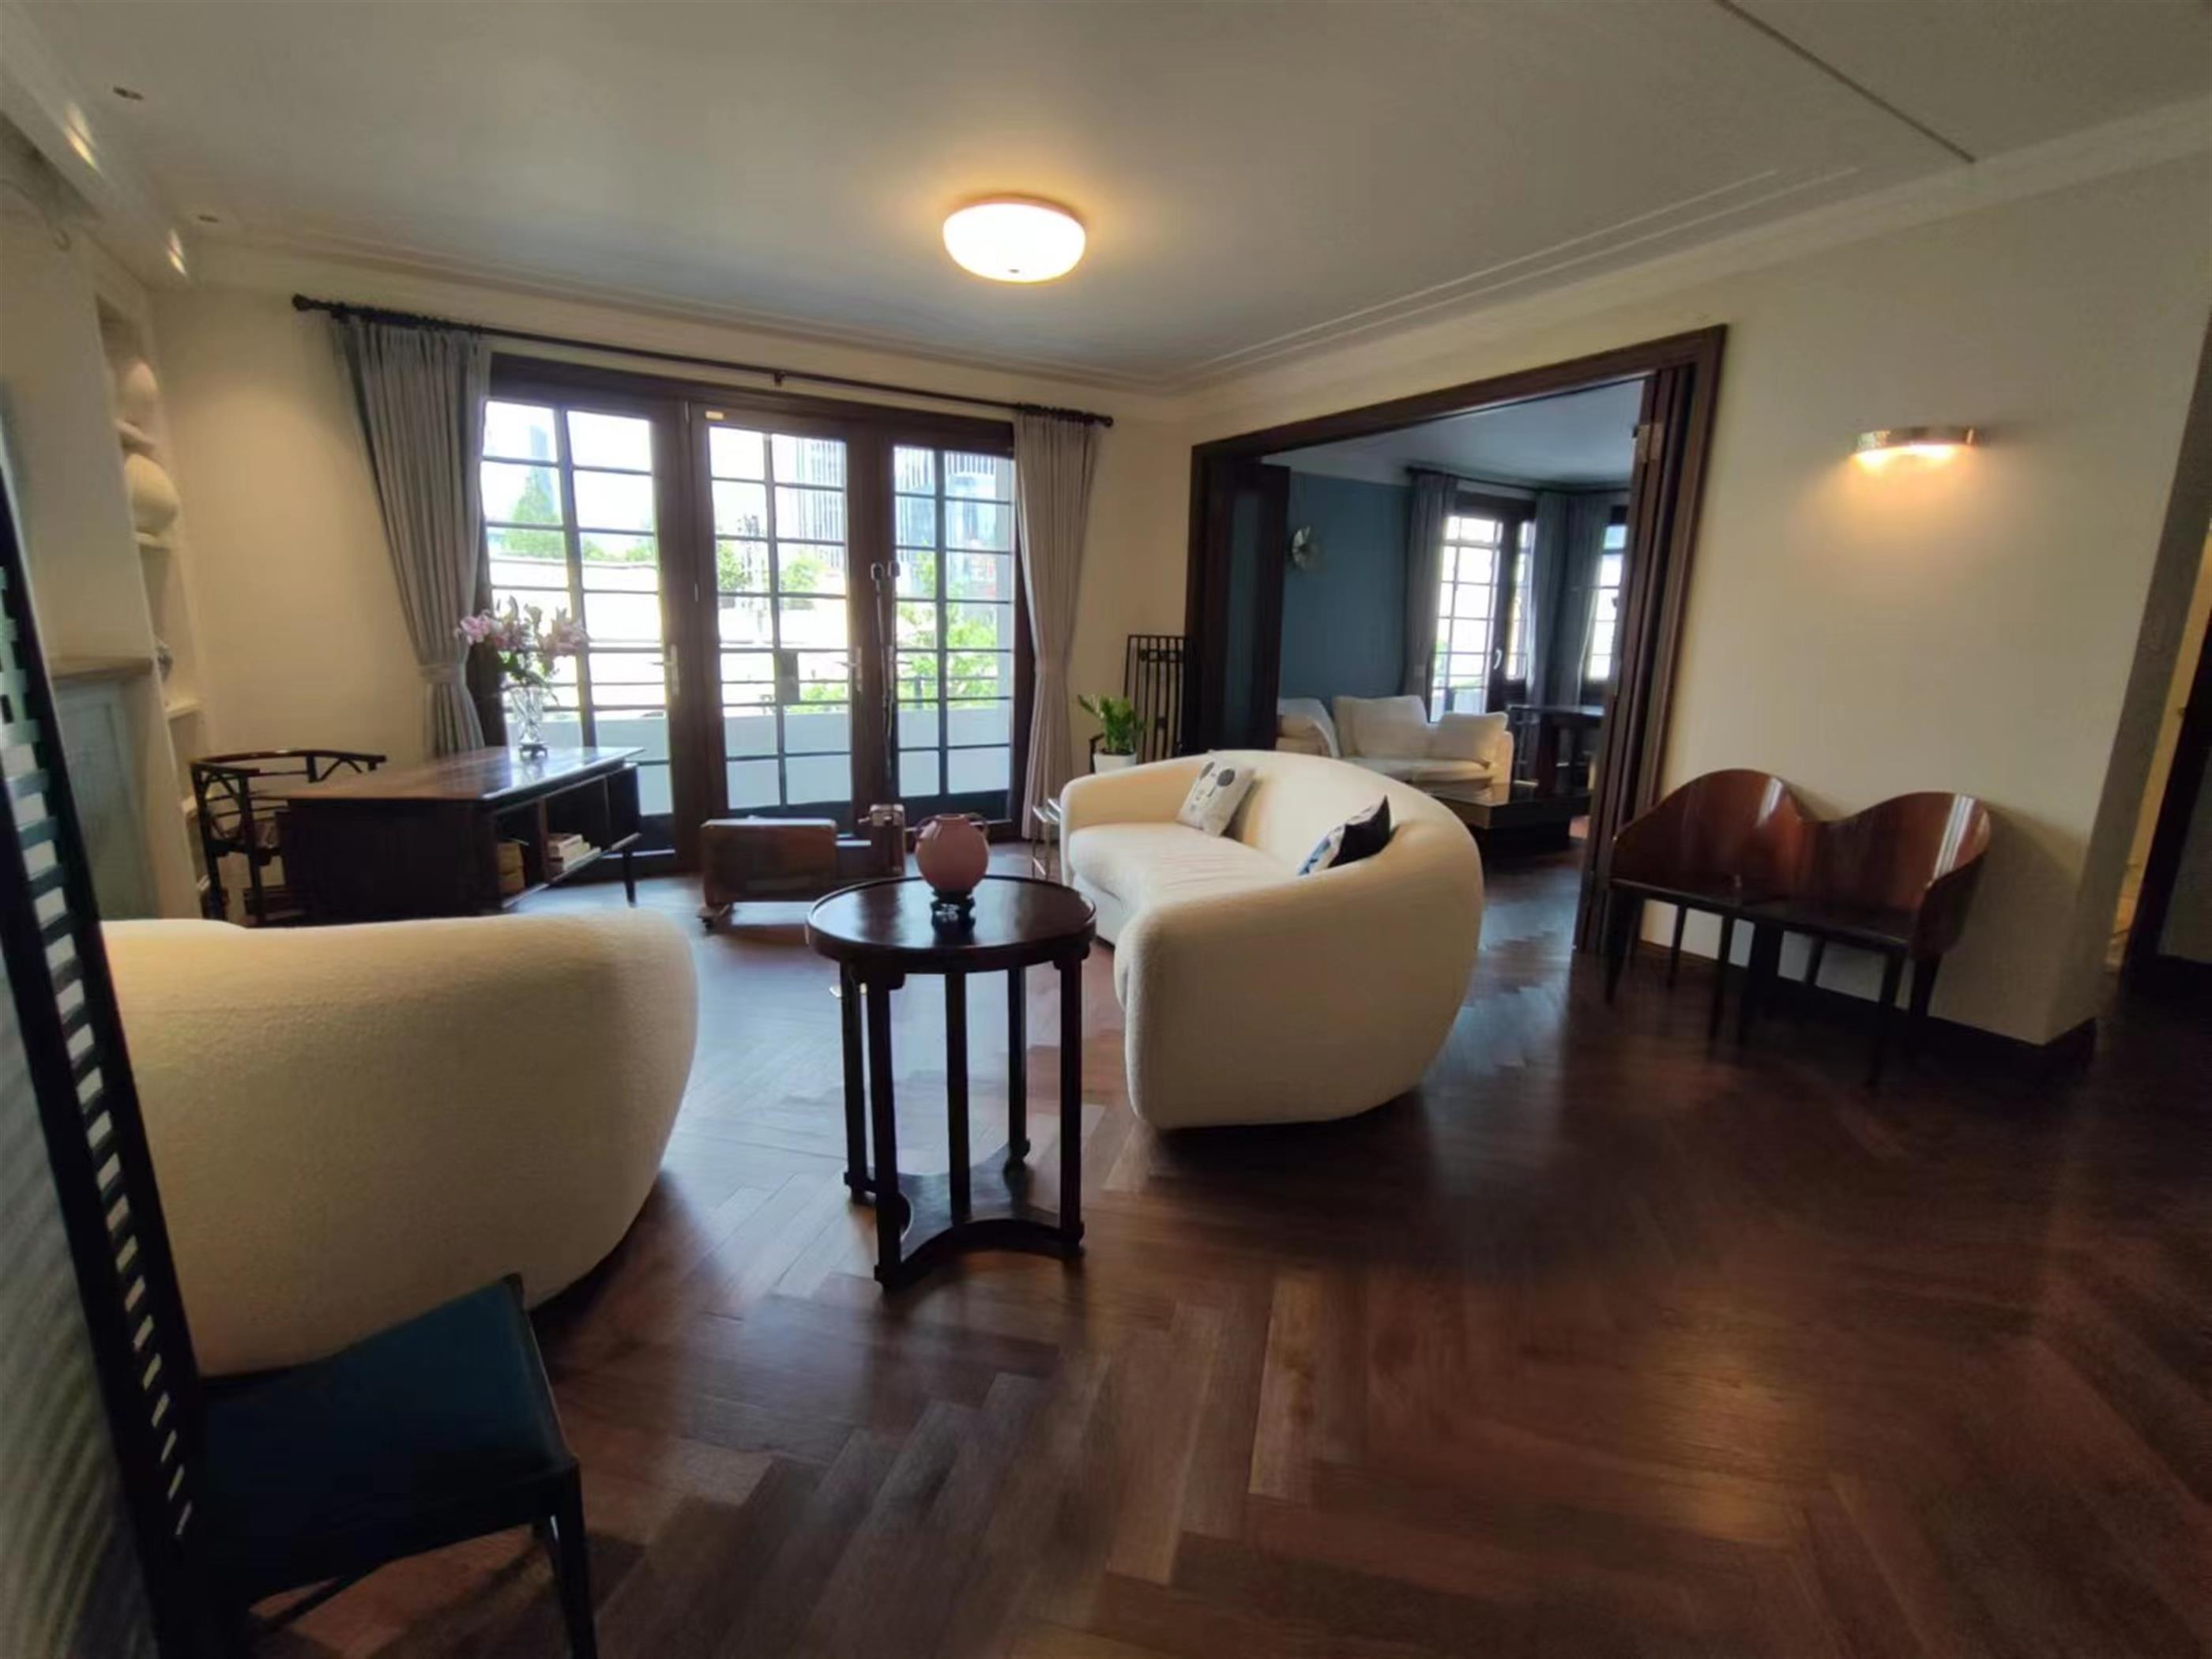 Classic Spacious Chic 3BR Apartment for Rent in Shanghai’s 